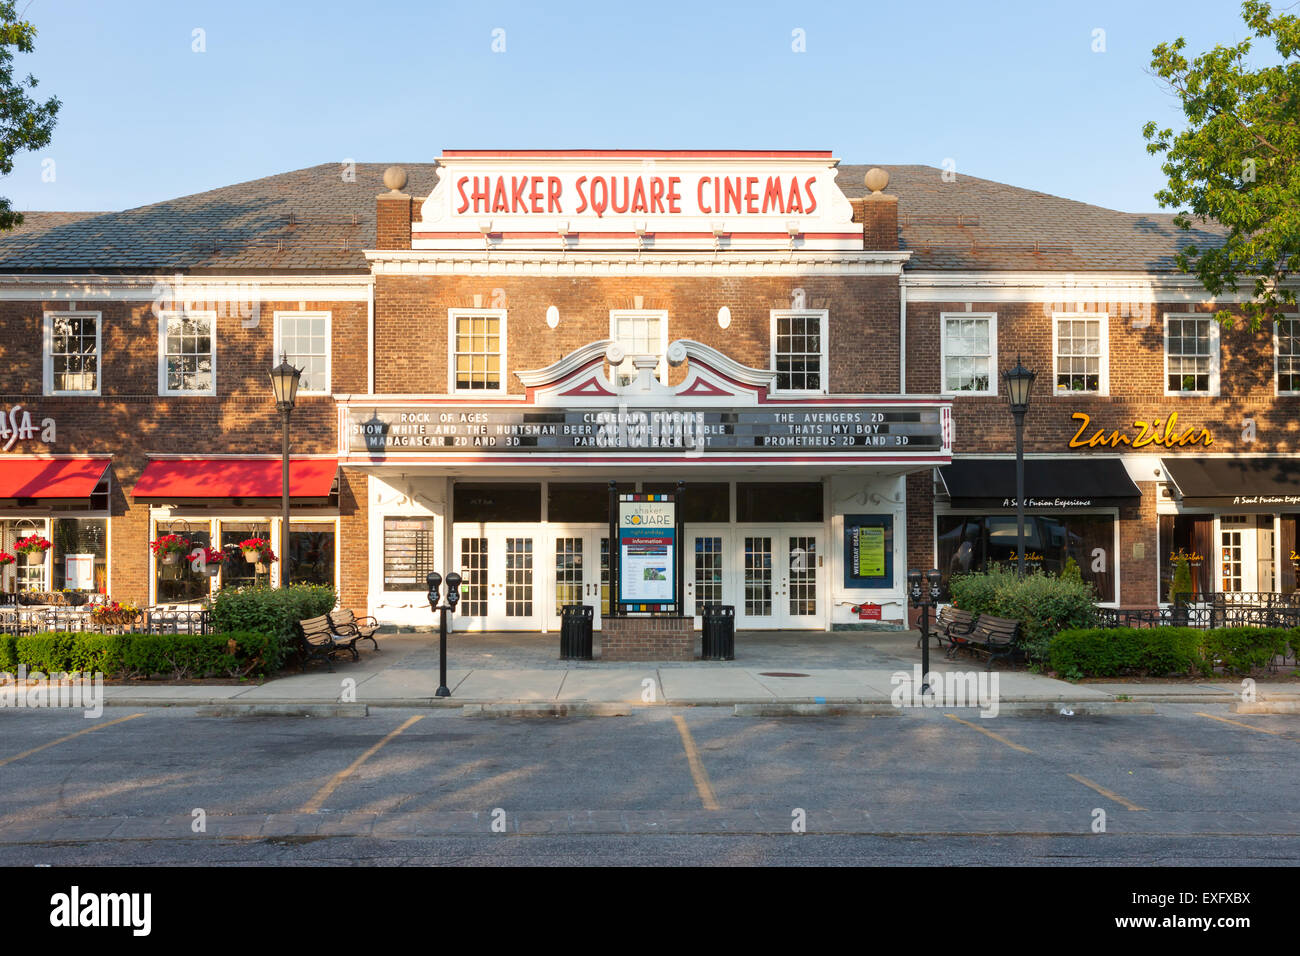 A view of the front of Shaker Square Cinemas in Shaker Square, Cleveland, Ohio. Stock Photo